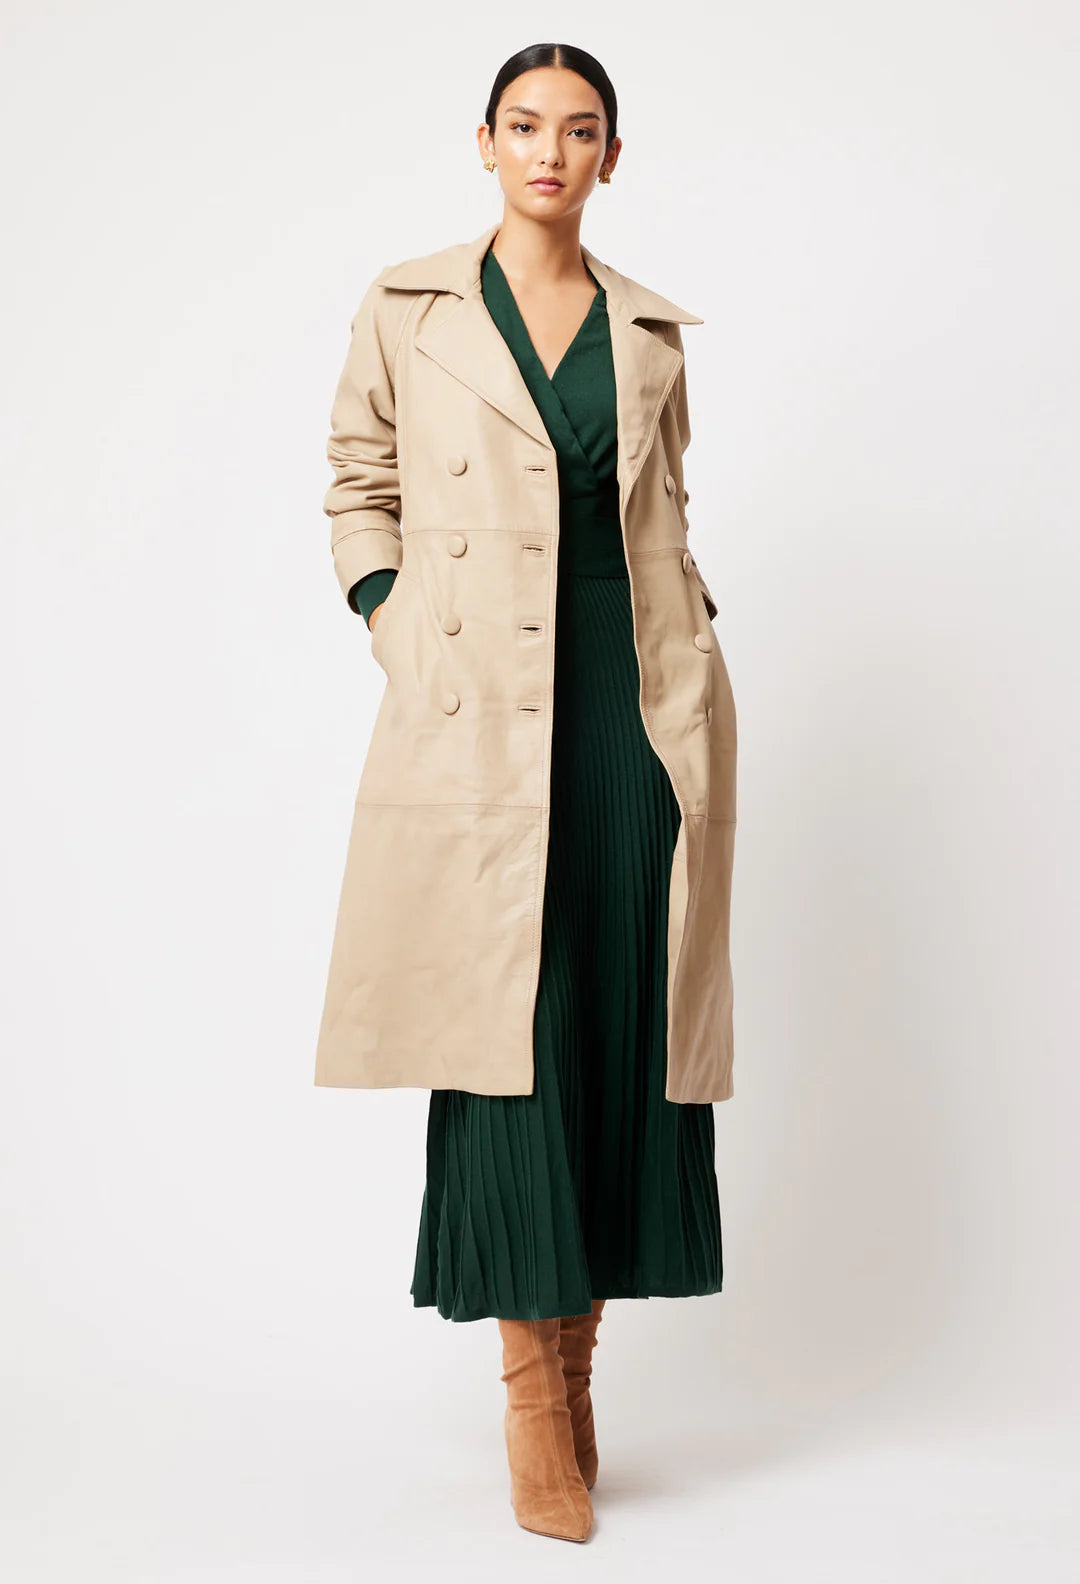 ONCE WAS - Astra Leather Trench Coat in Oatmeal